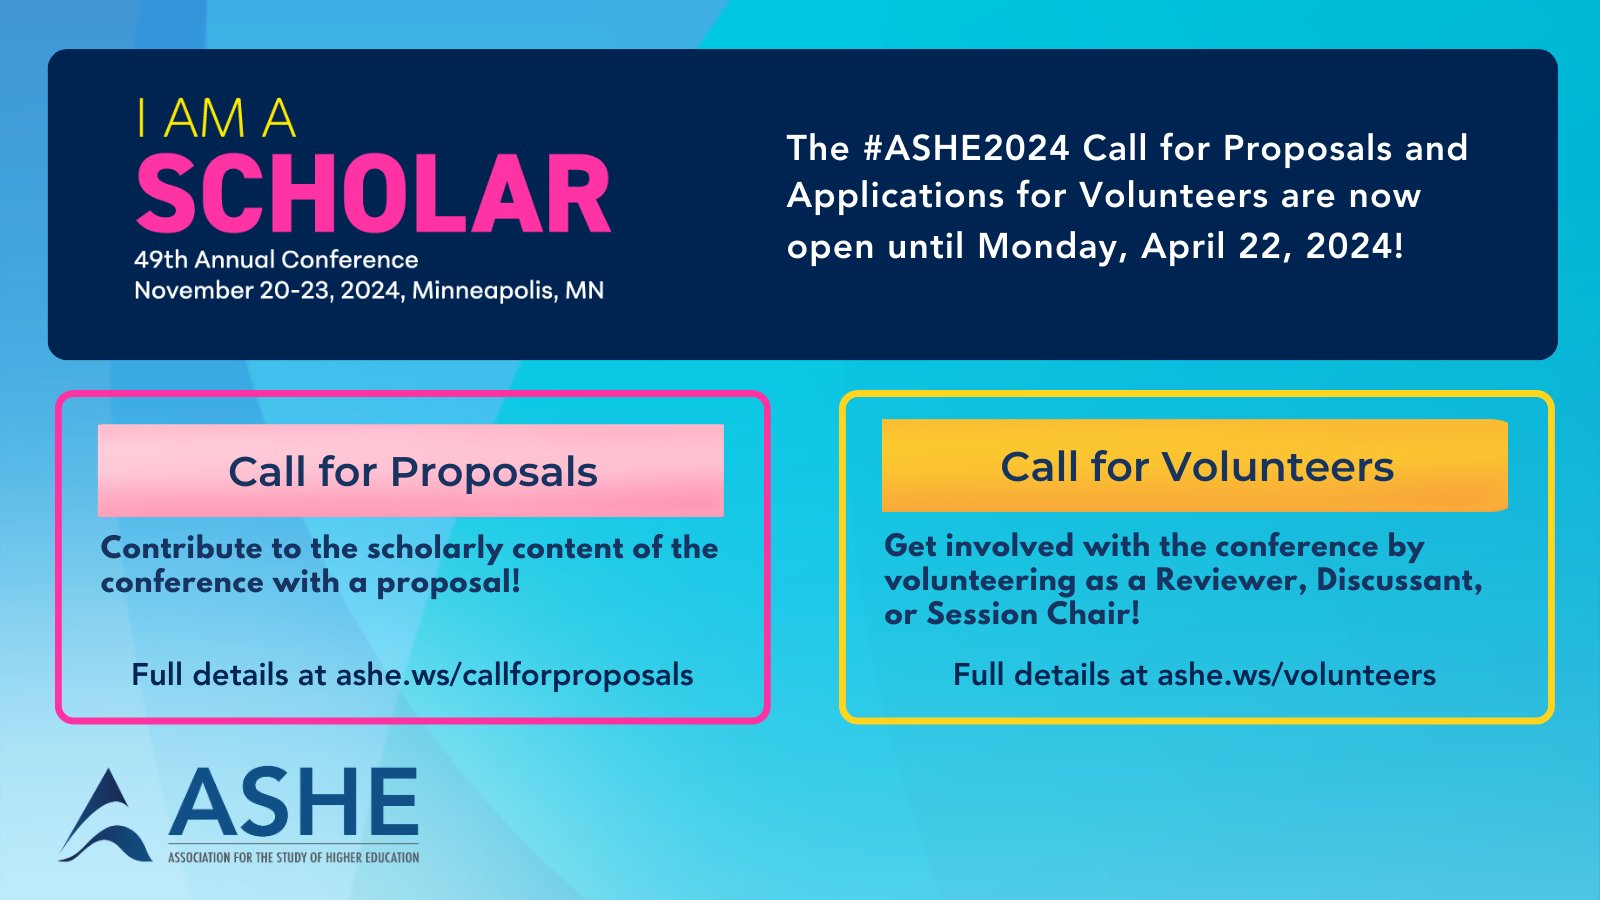 Dr. Rosie Perez on X: ✨The #ASHE2024 Call for Proposals & Volunteer  Application is open!✨ I'm honored to serve as Program Committee Co-Chair  w/@jonathantpryor & look forward to honoring the many ways